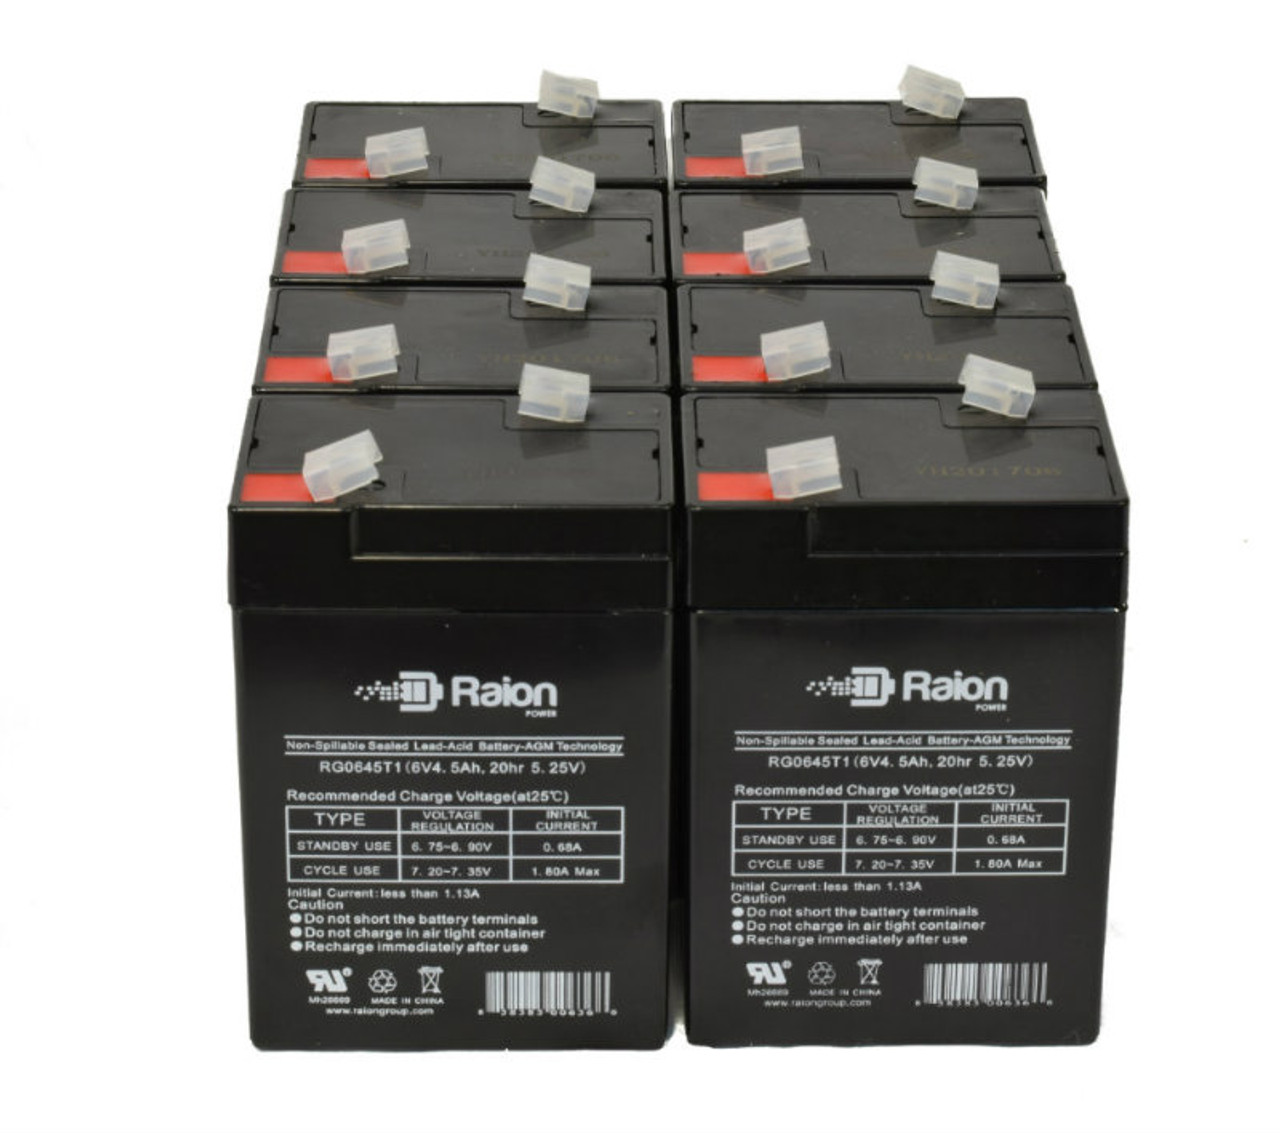 Raion Power 6V 4.5Ah Replacement Emergency Light Battery for Chloride 100-001-0075 - 8 Pack